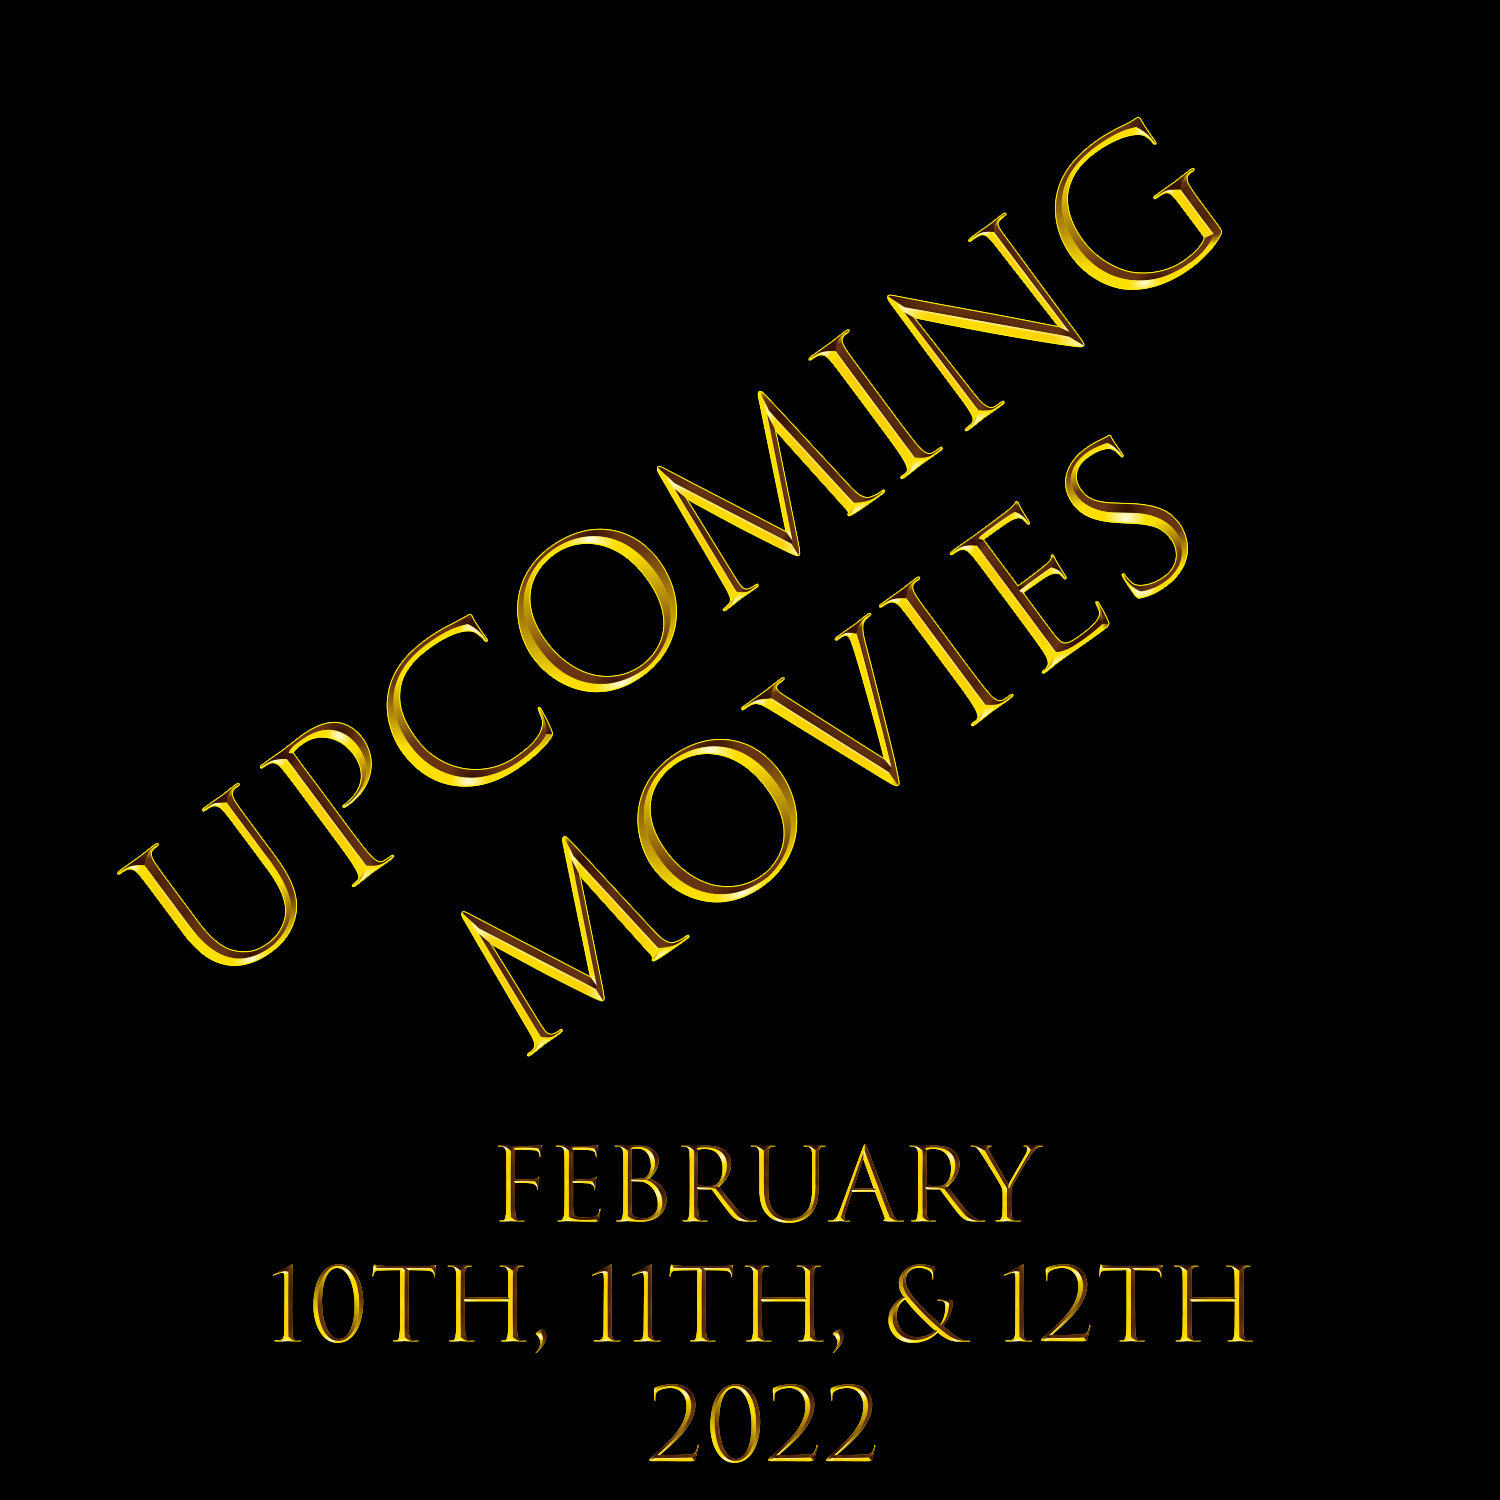 Upcoming Movies - February 10th, 2022 (1 day late)